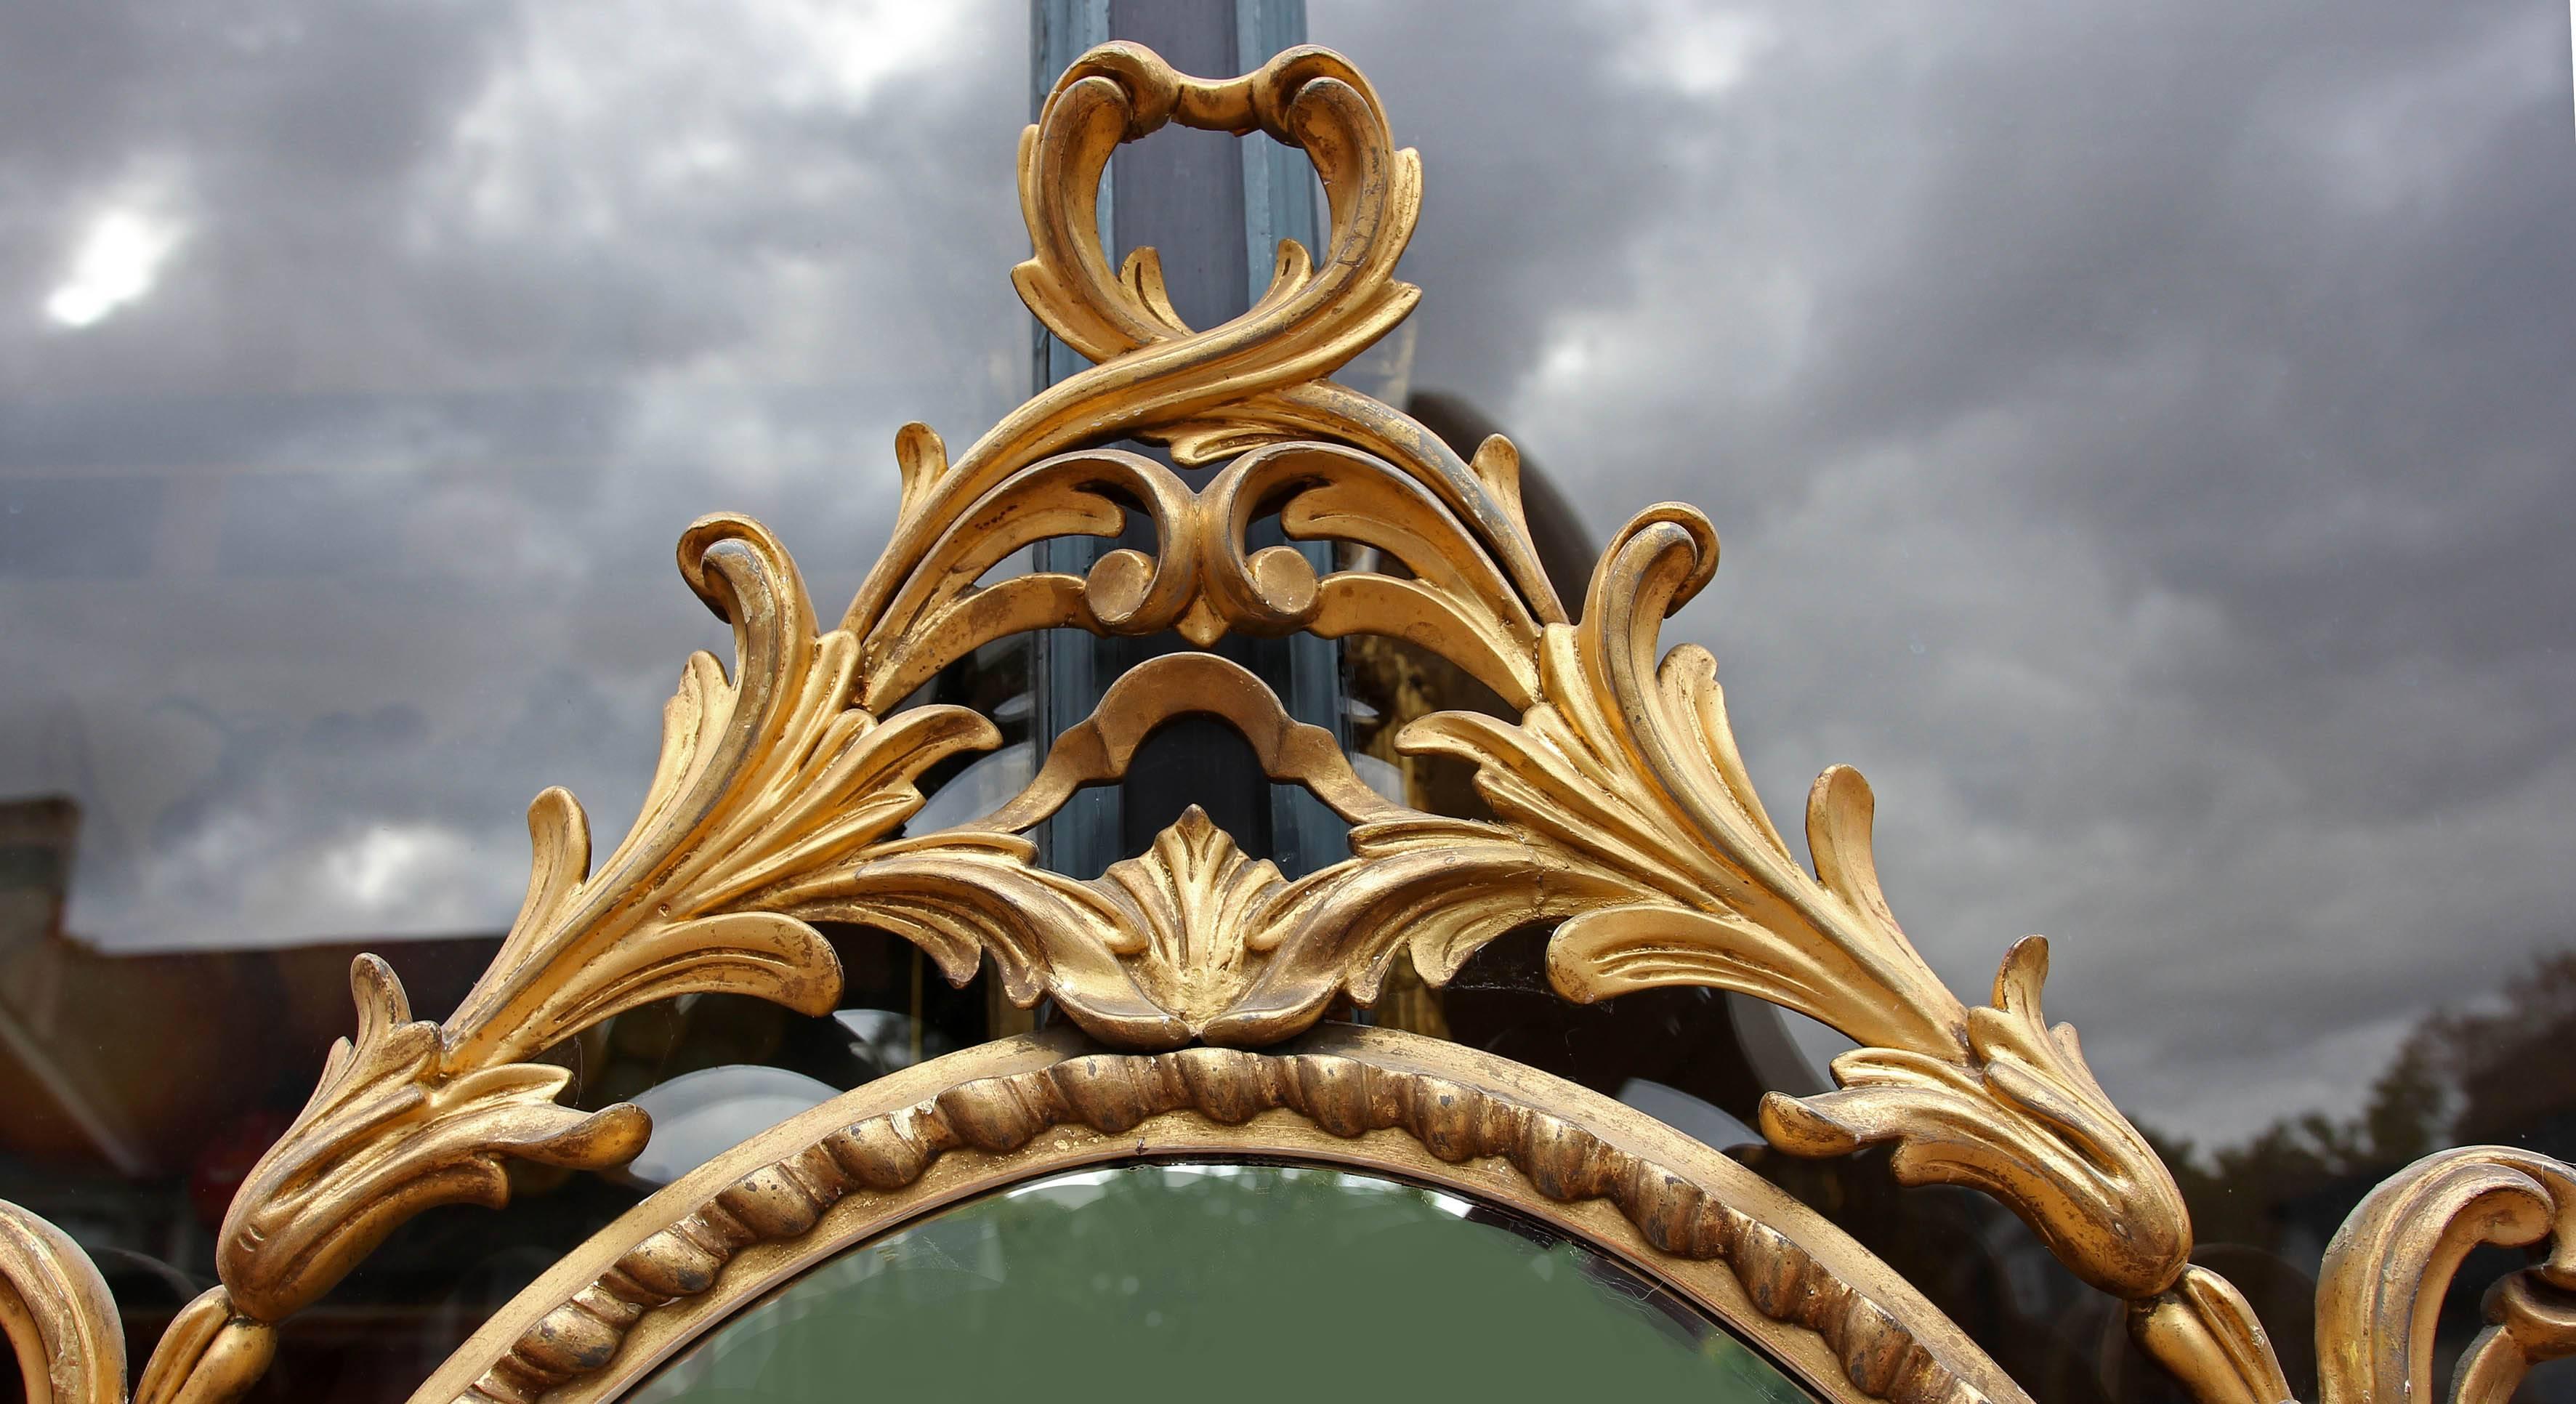 French 19th century gilt and carved wood mirror. Excellent quality. A beautiful and fluid design.